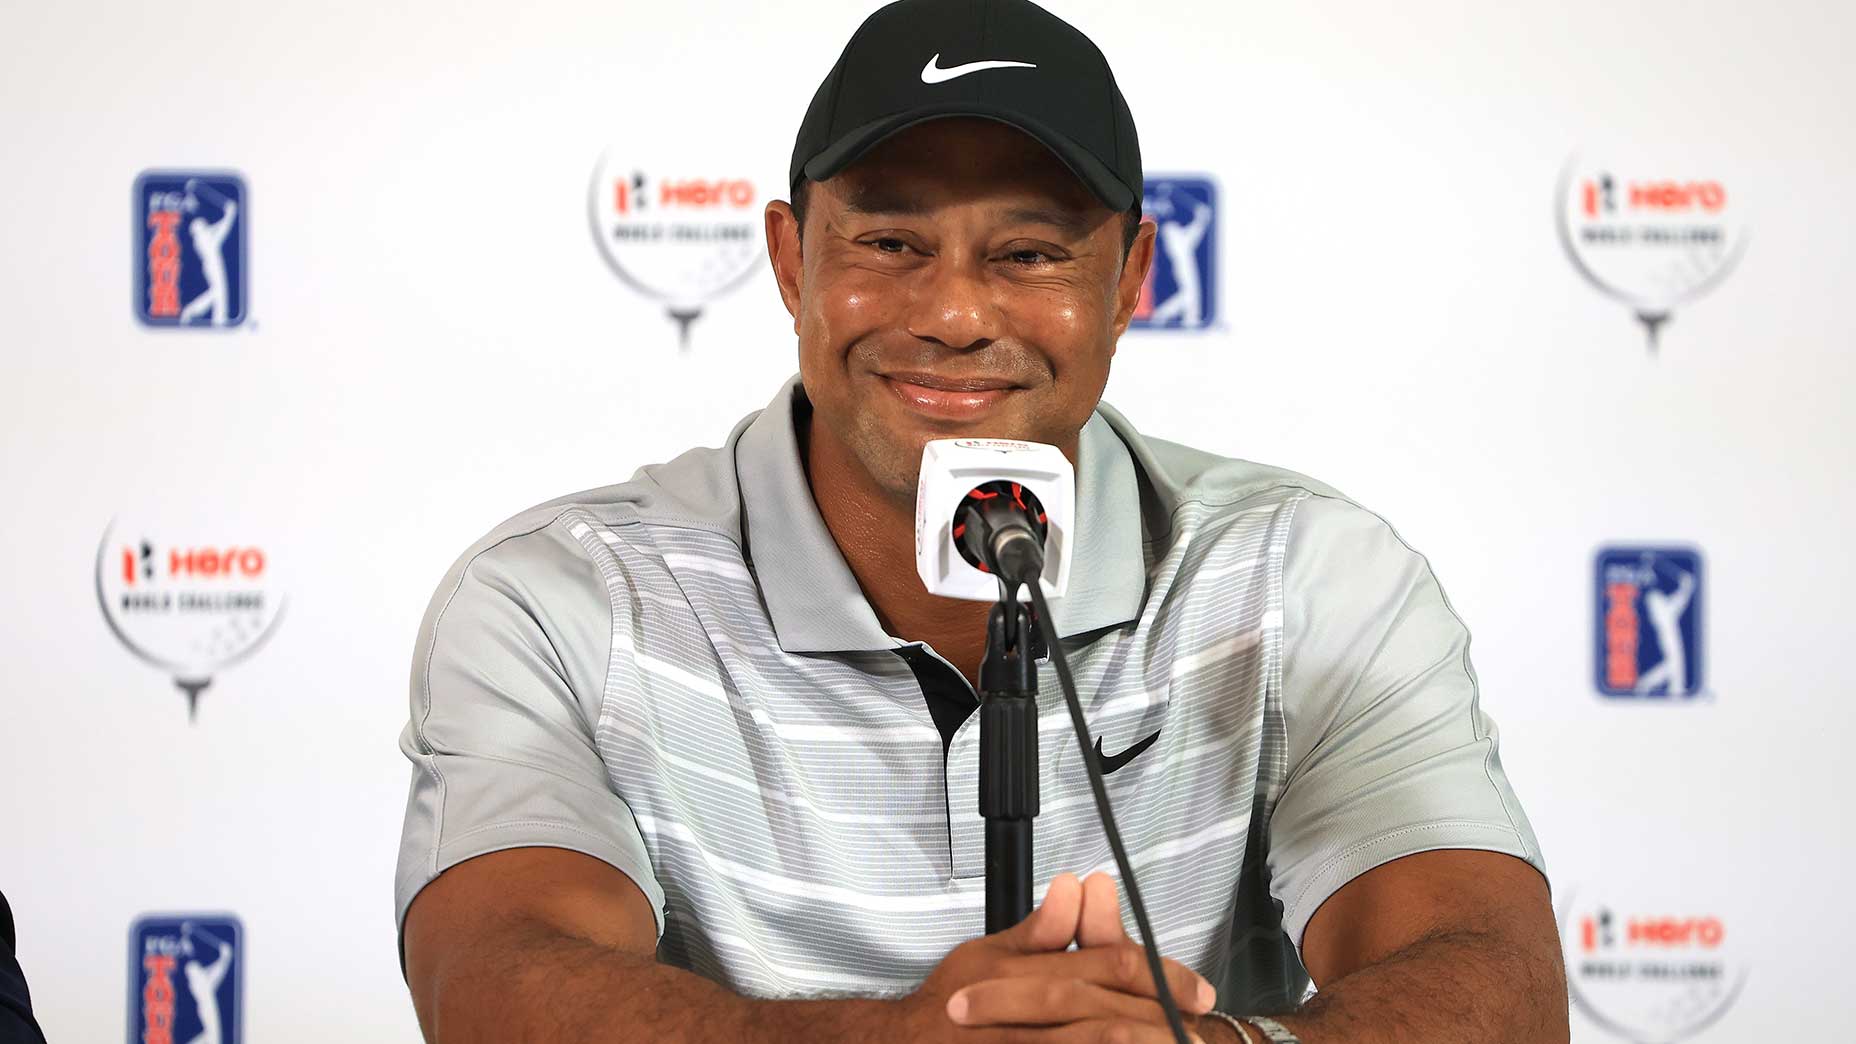 Tiger Woods smiles during a press conference at the Hero World Challenge on Tuesday.